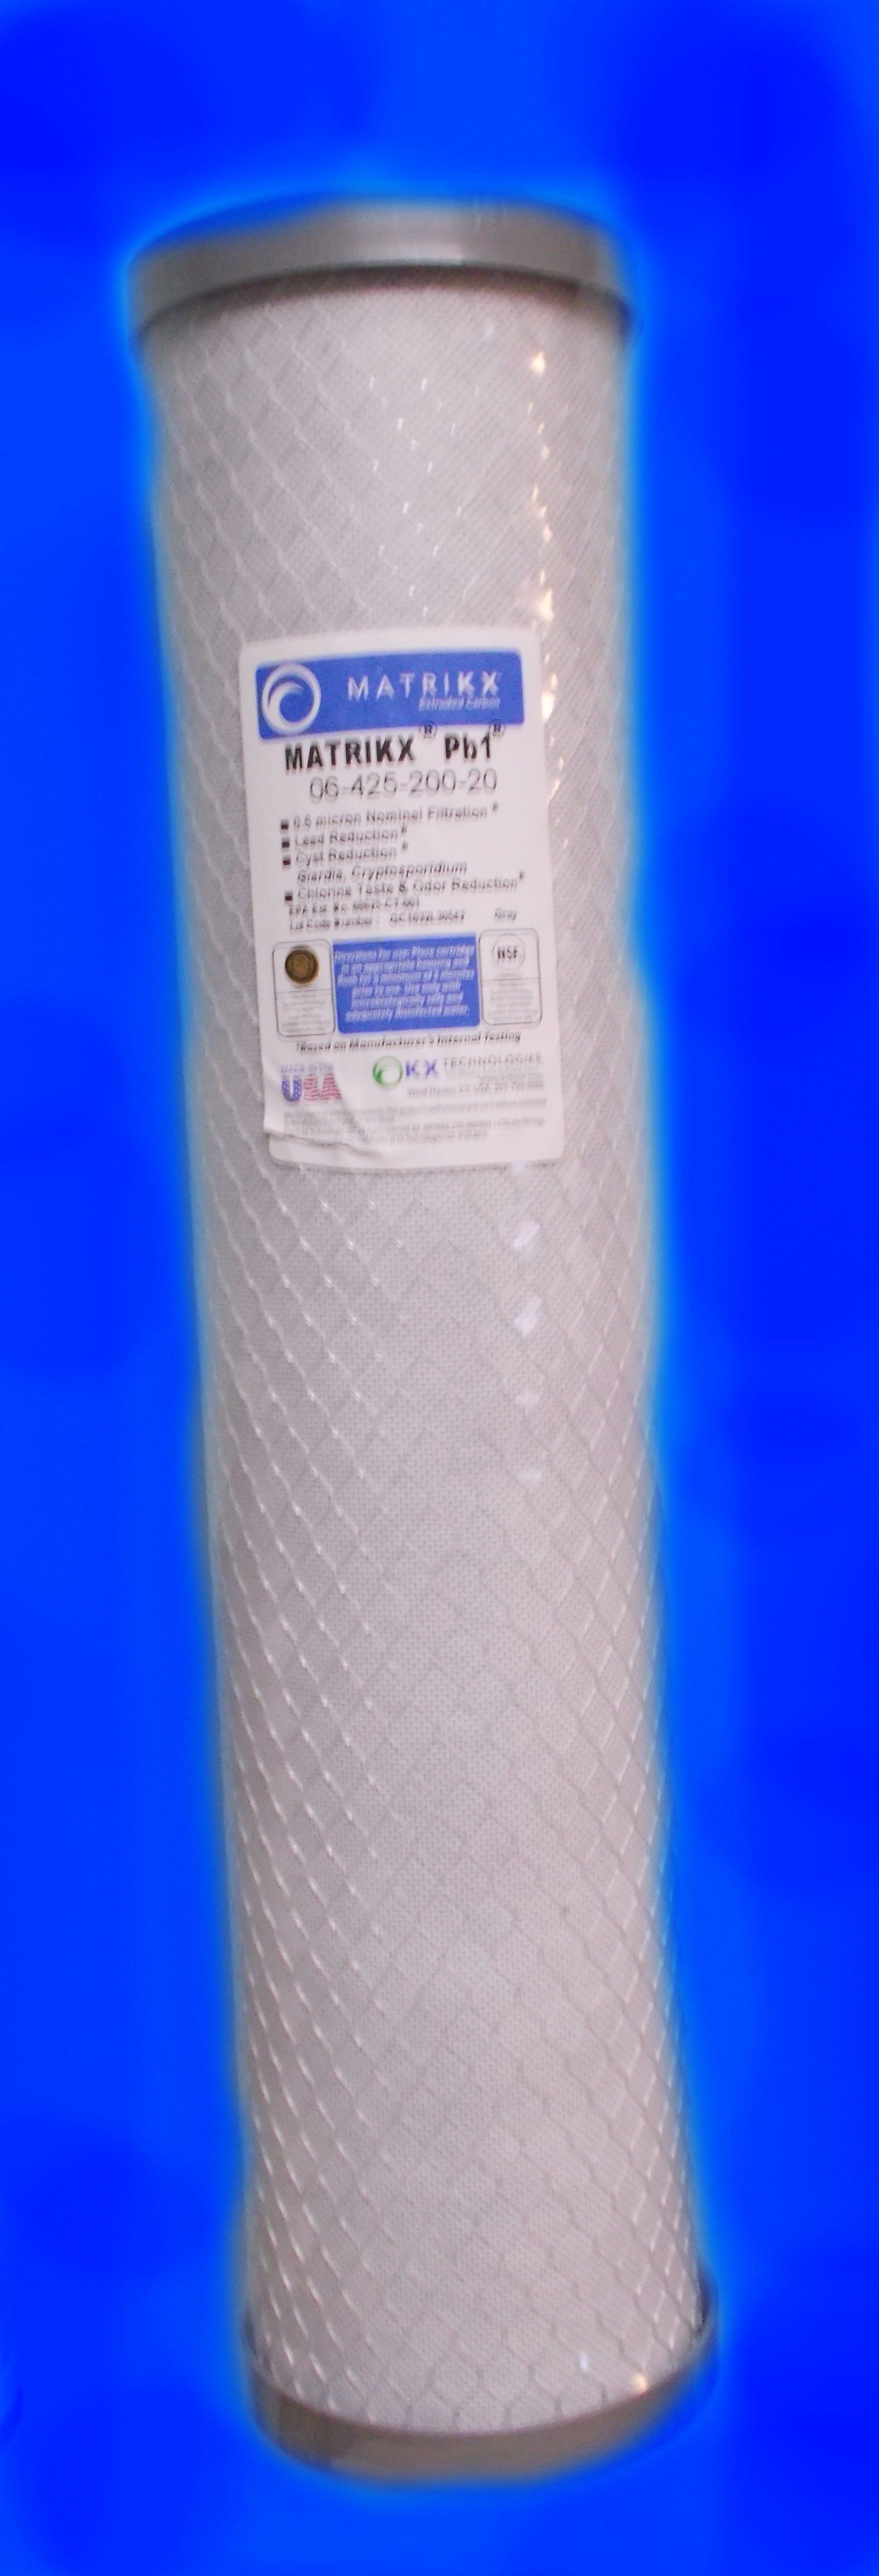 Replacement Whole House Lead Water Filter Cartridge 4.5 "x 20"